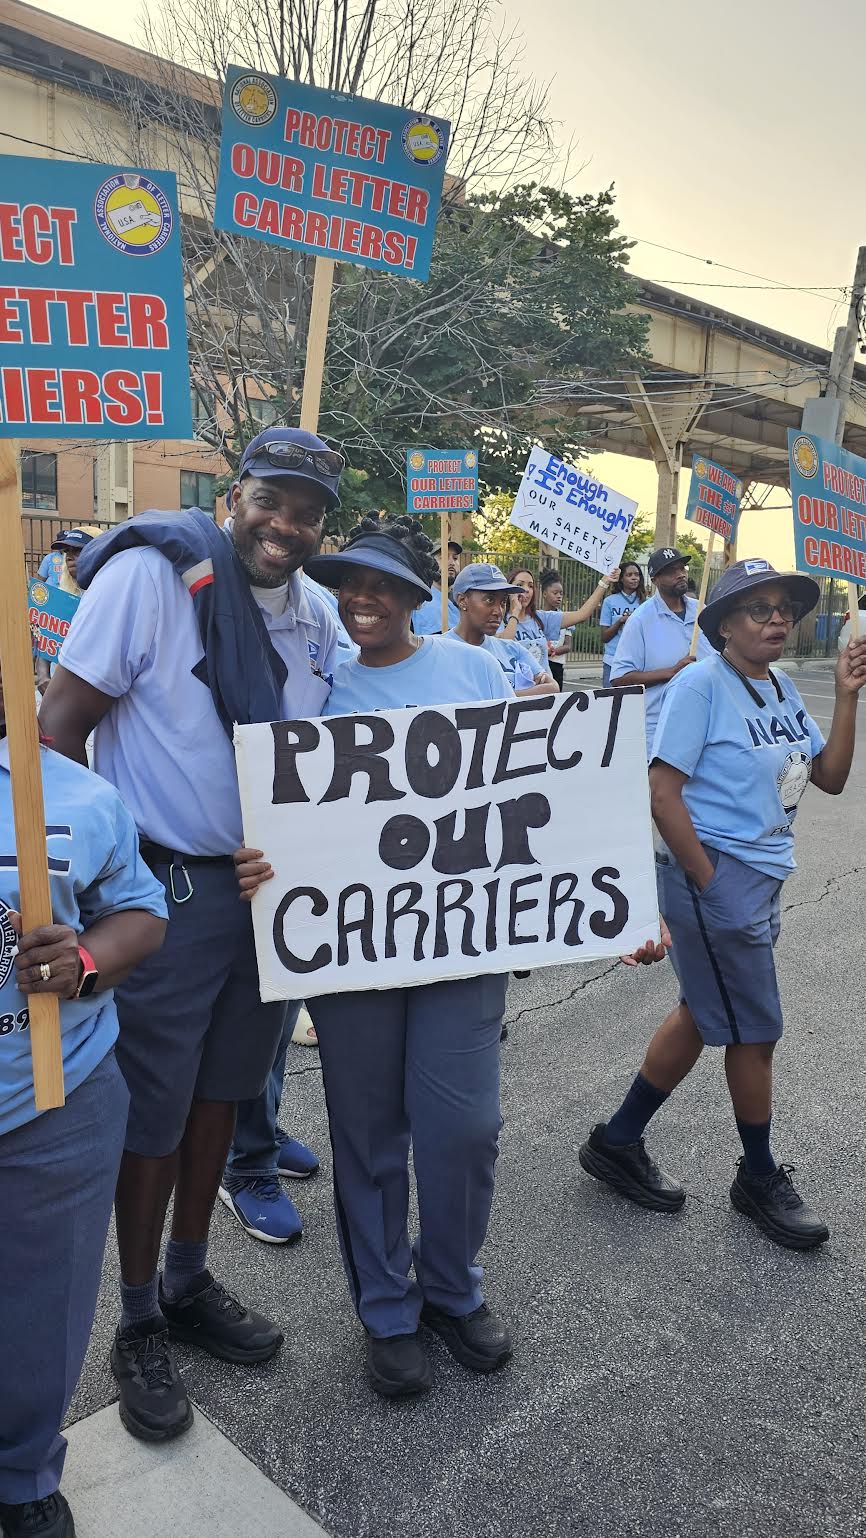 PROTECT OUR CARRIERS